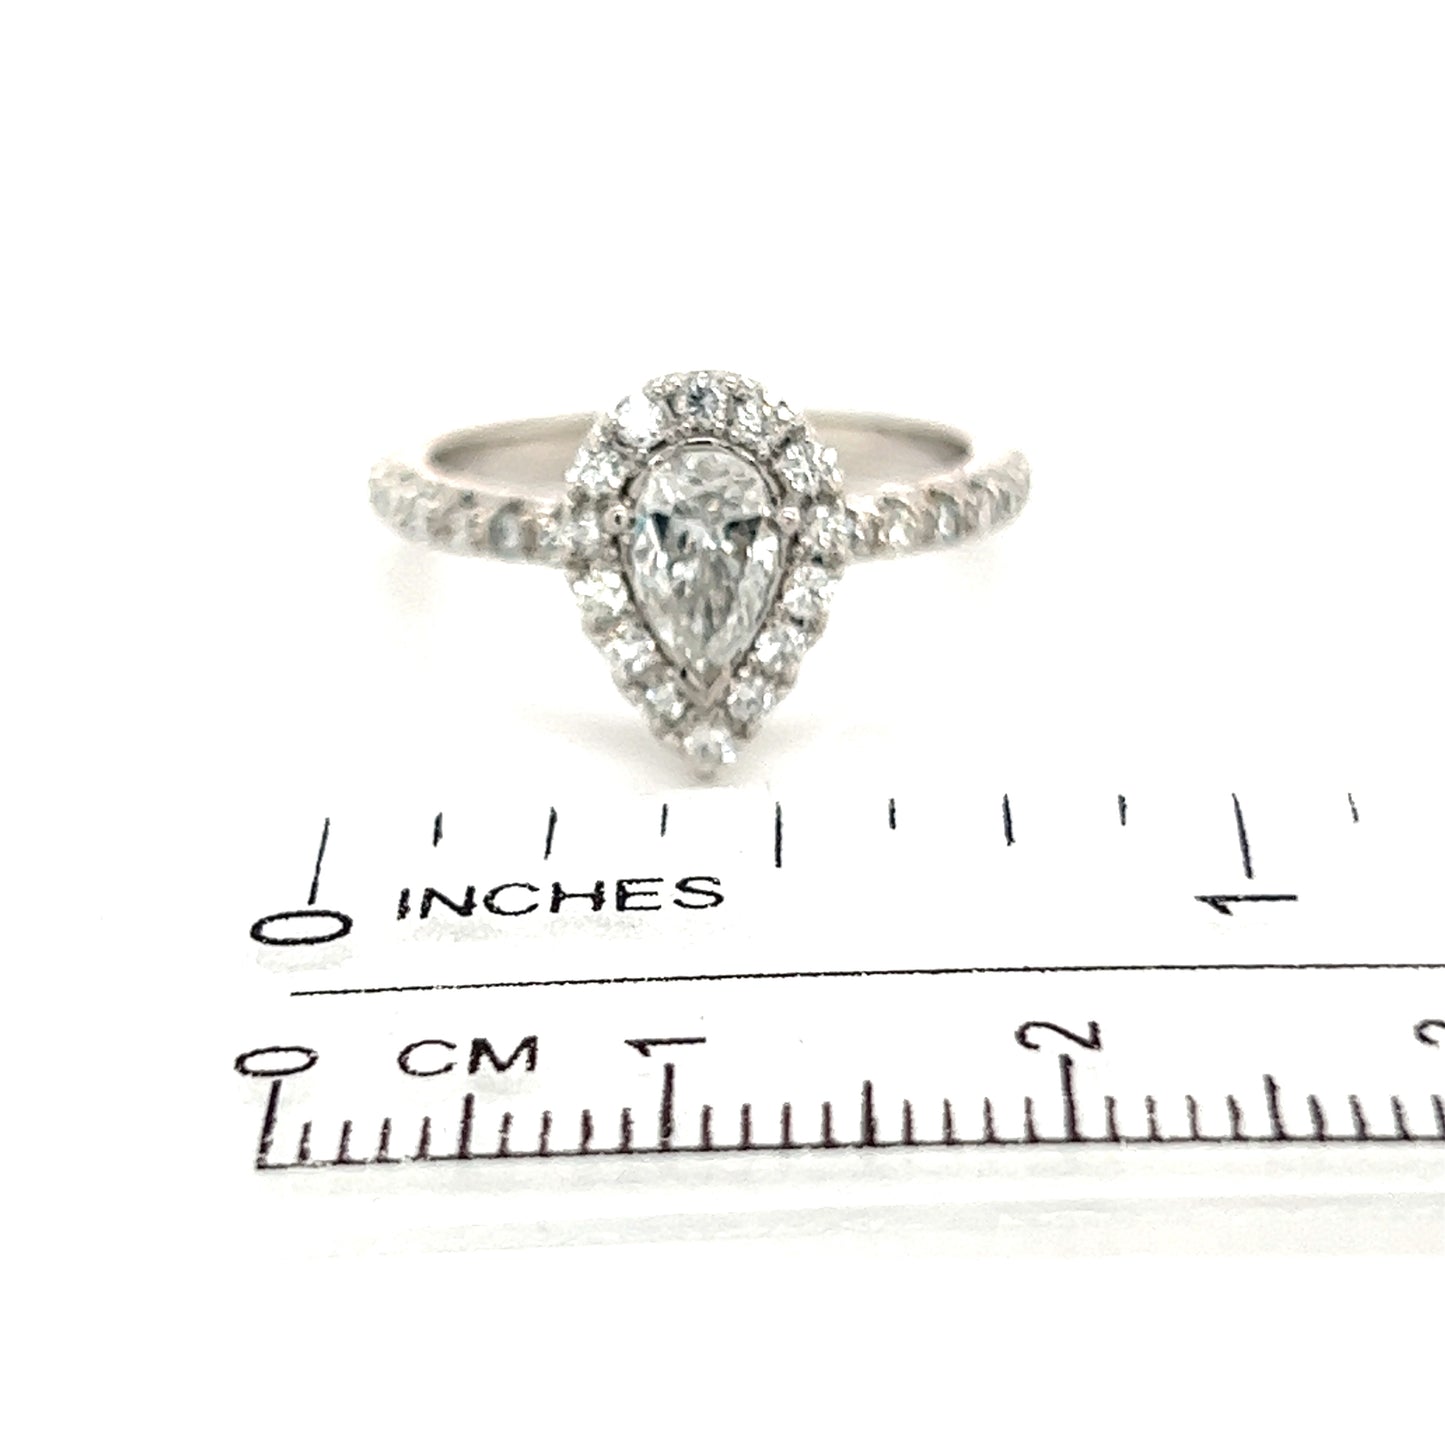 Diamond Engagement Ring 14k White Gold 0.90 TCW Certified $4,950 210736 - Certified Estate Jewelry